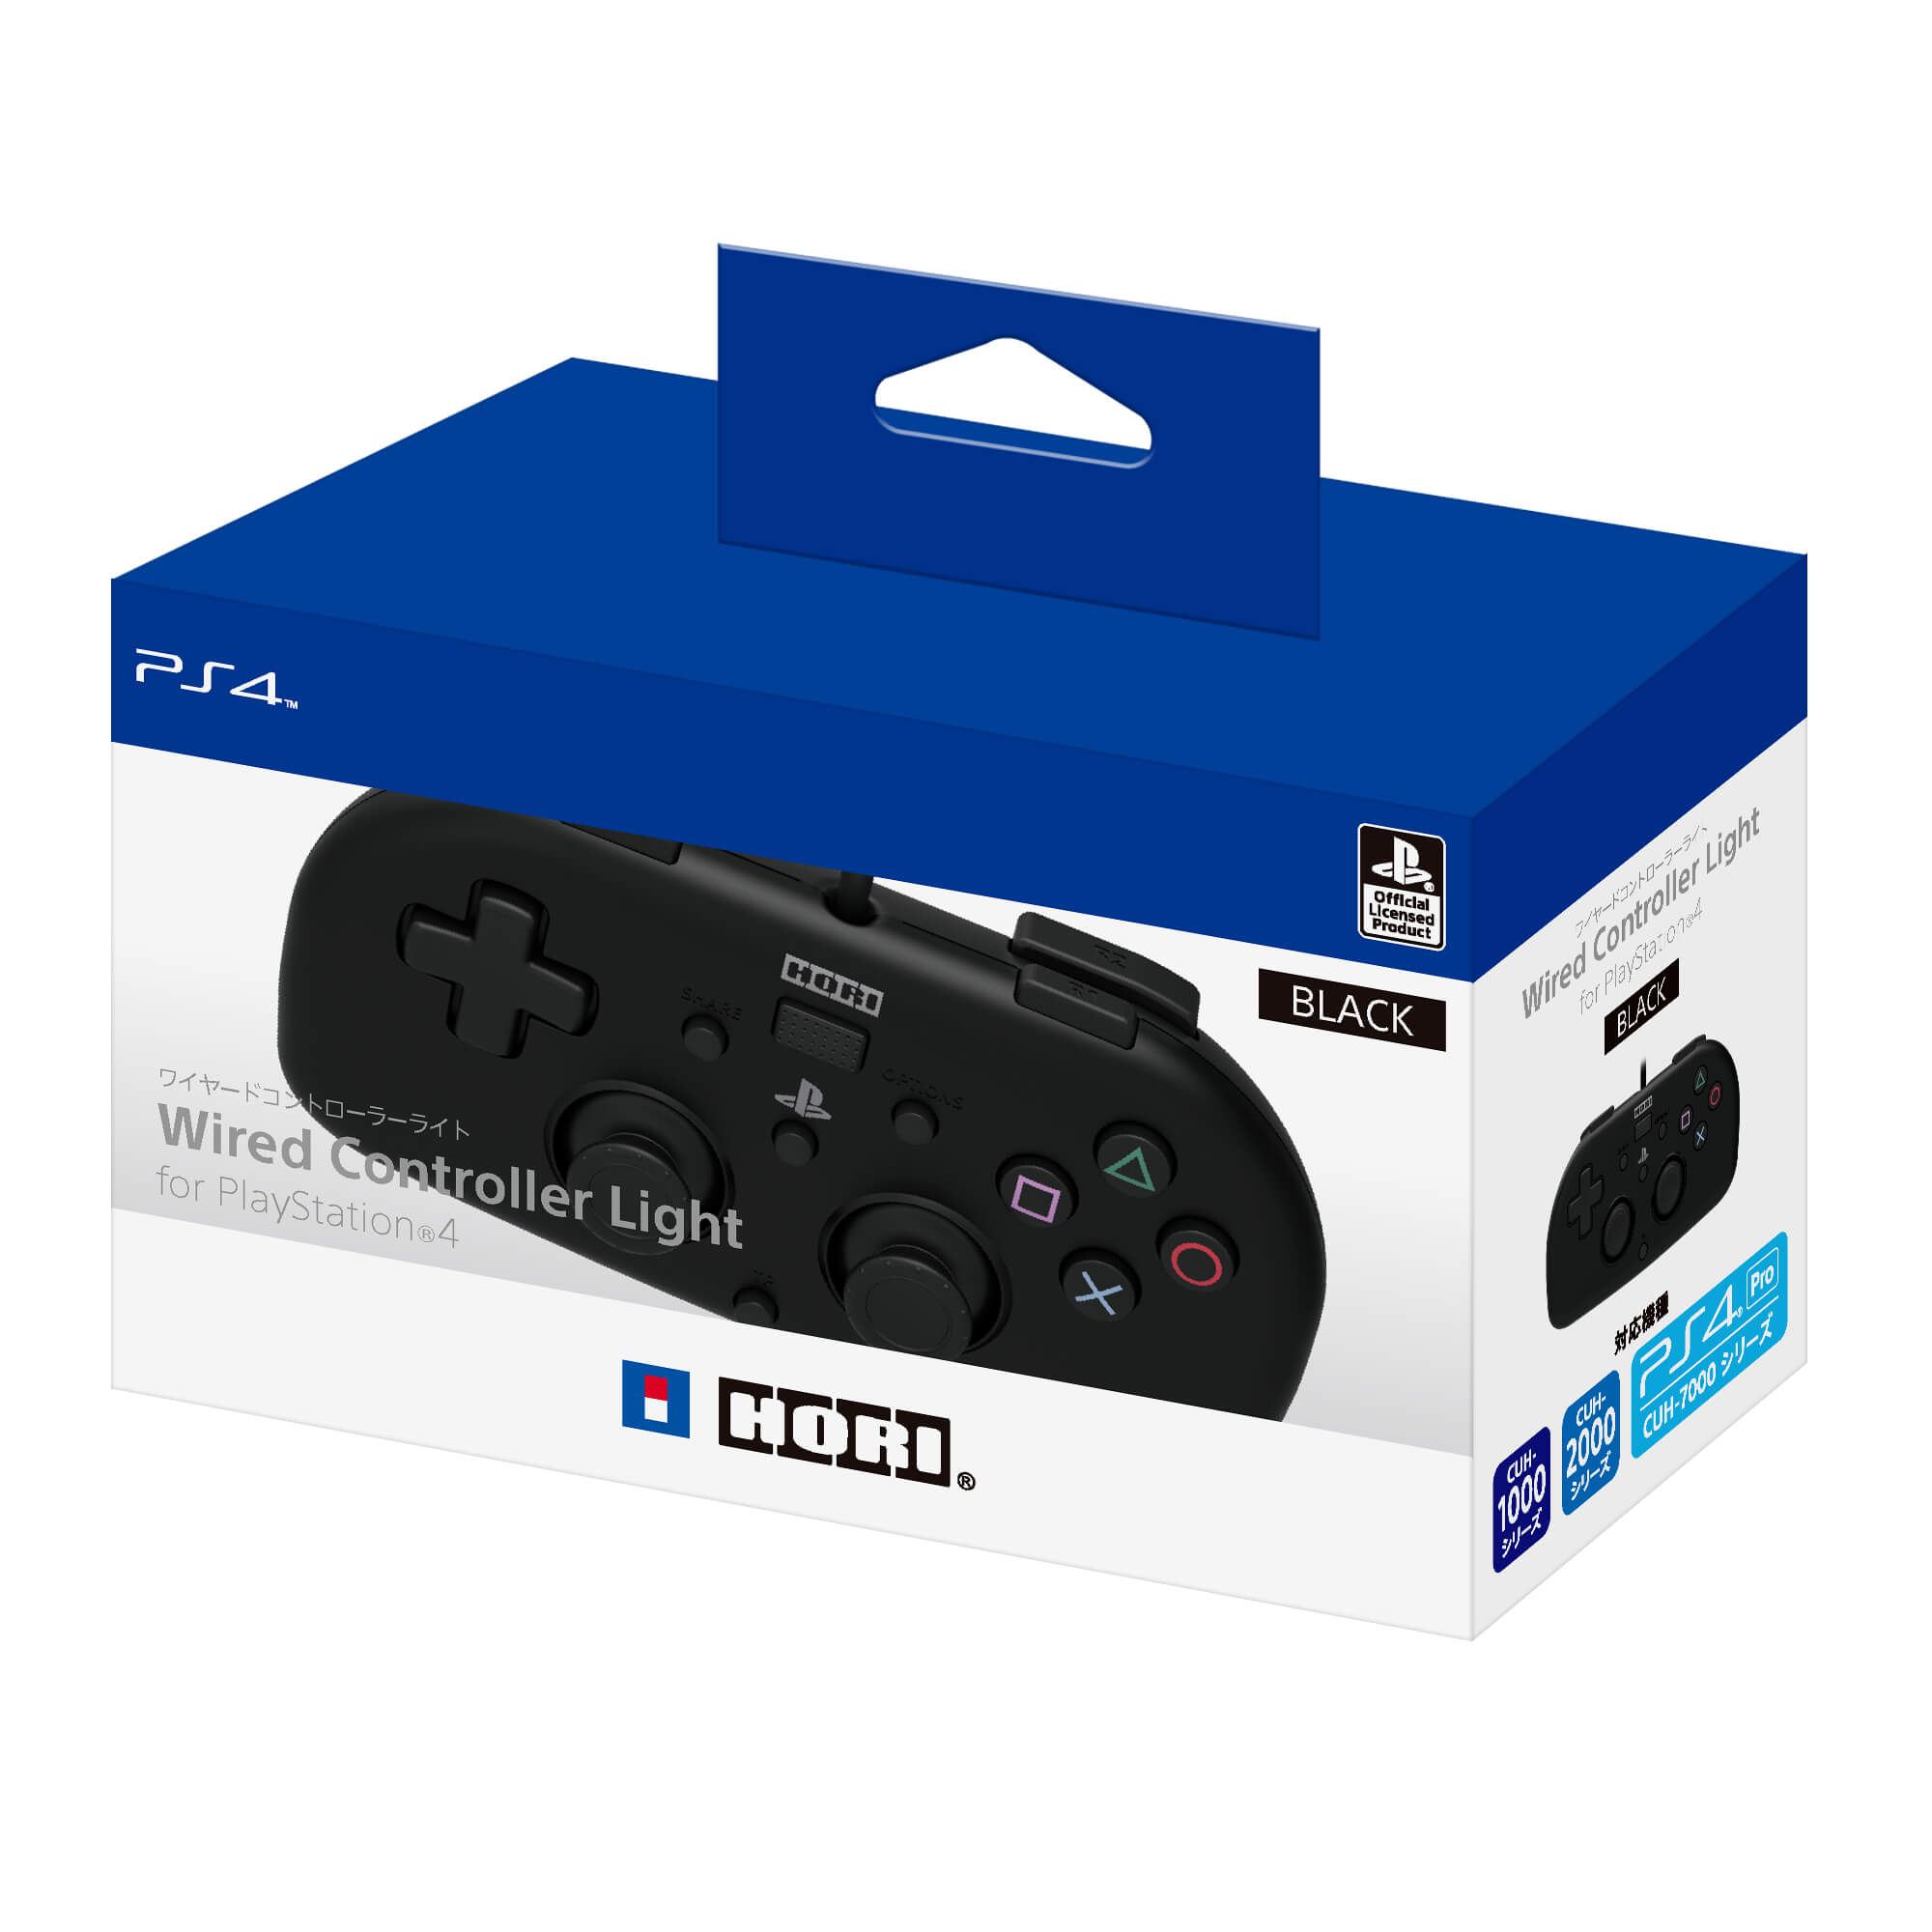 Hori Wired Controller Light for PlayStation 4 (Black) for